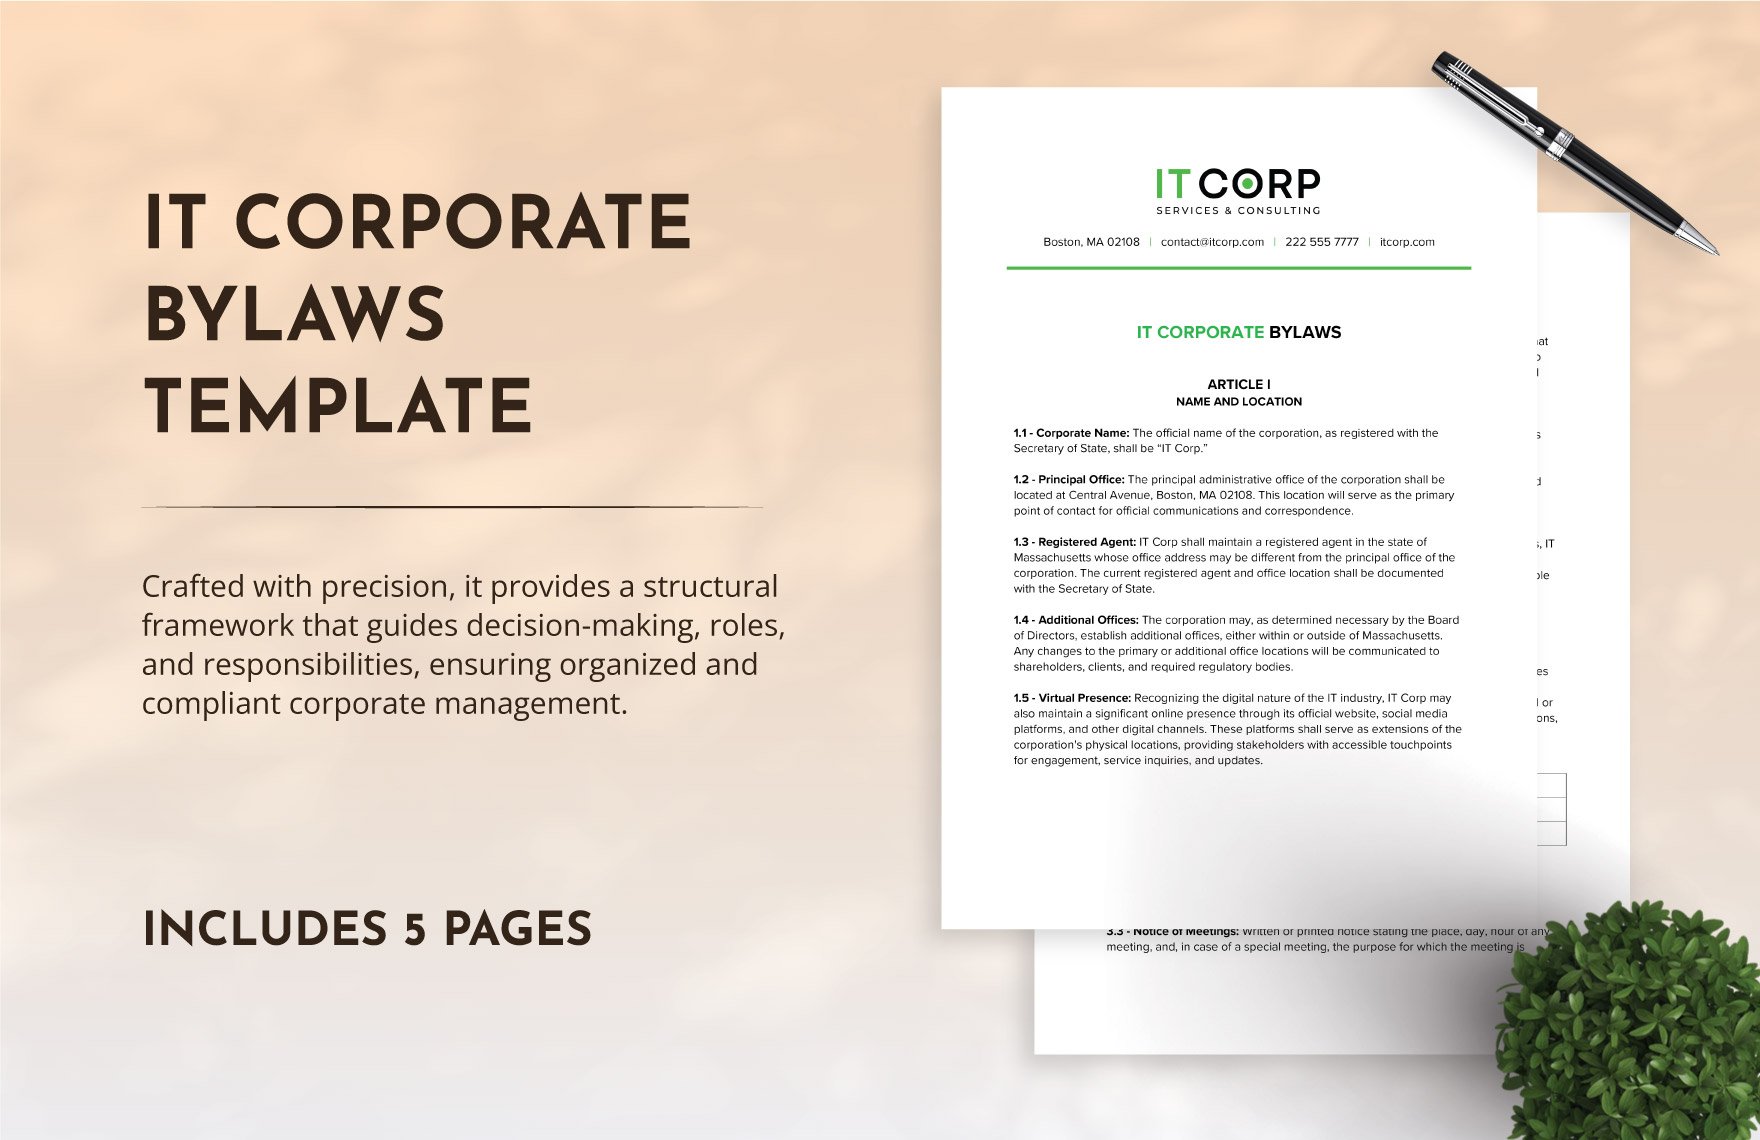 IT Corporate Bylaws Template in Word, Google Docs, PDF